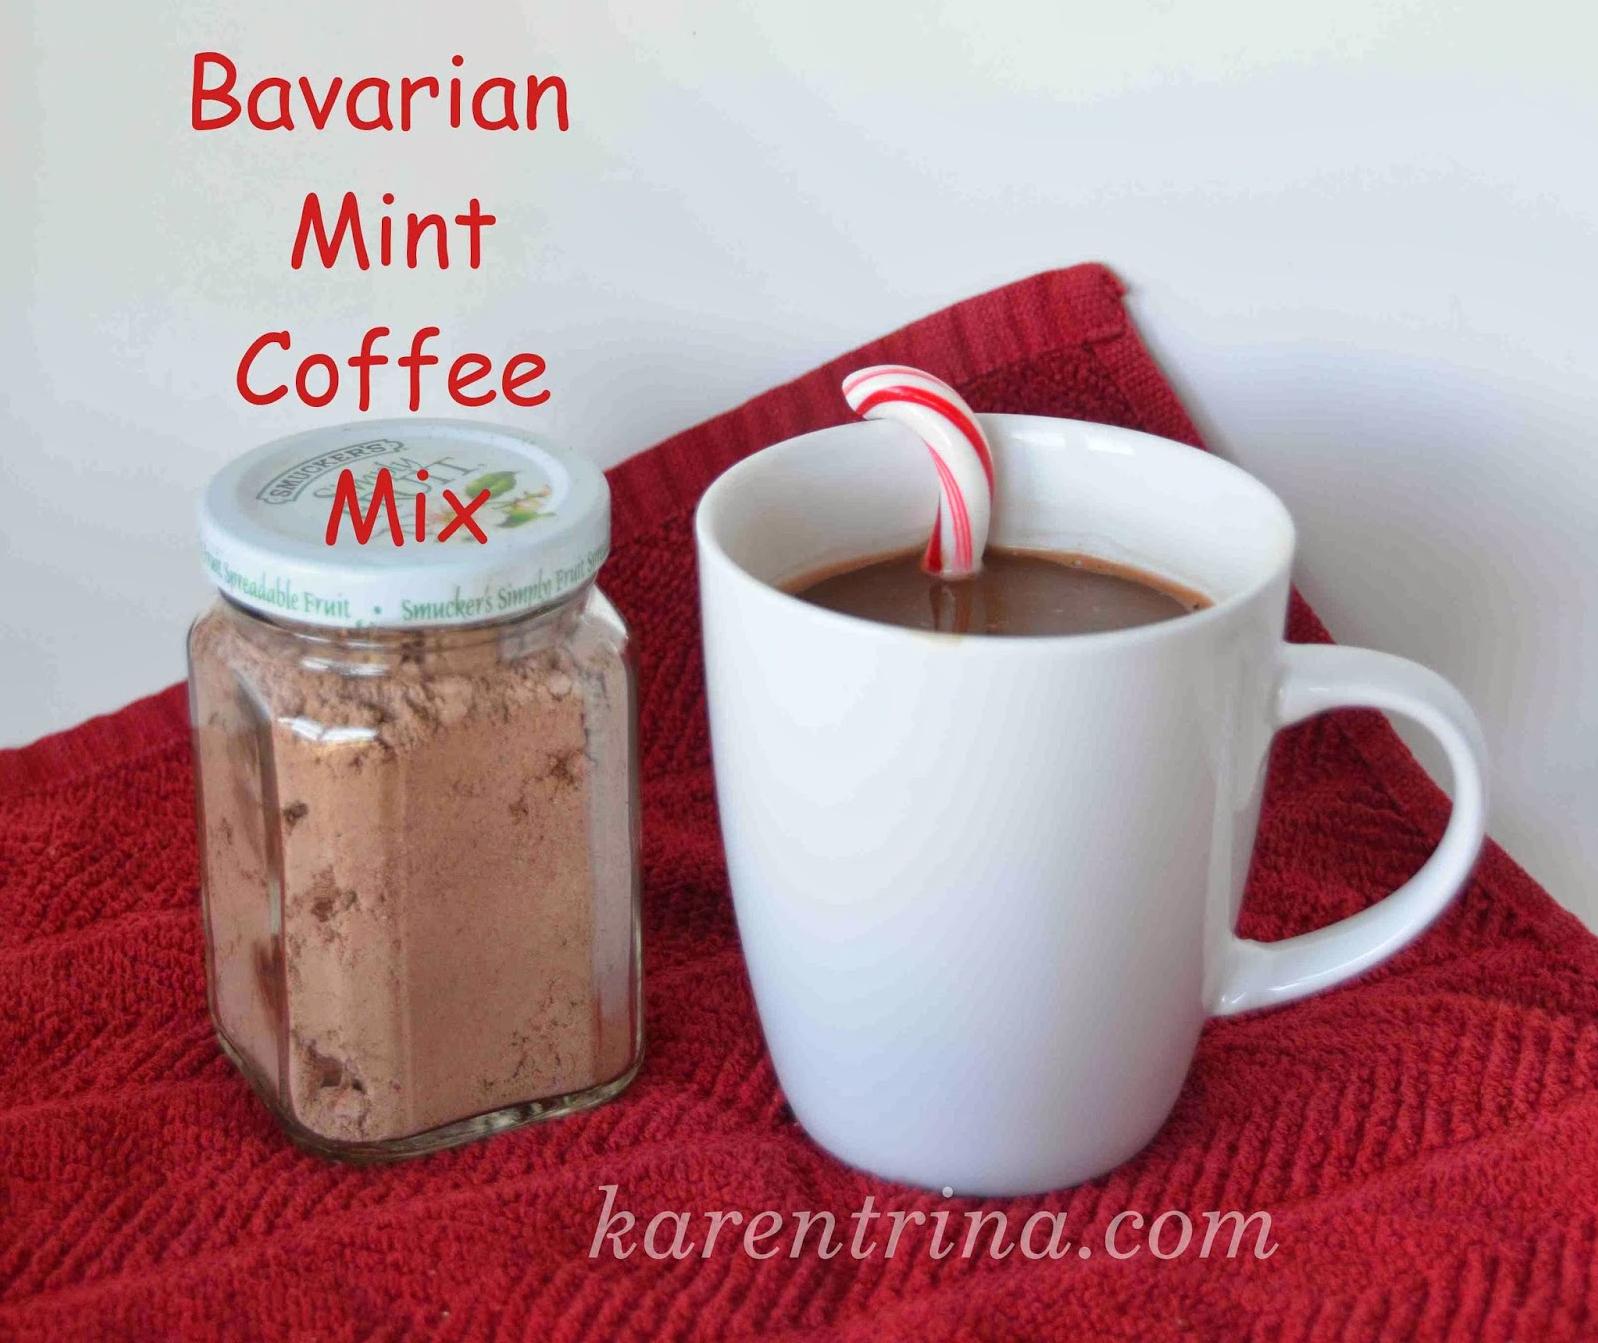  Trust me, your taste buds will thank you for trying Bavarian Mint Coffee Creamer.